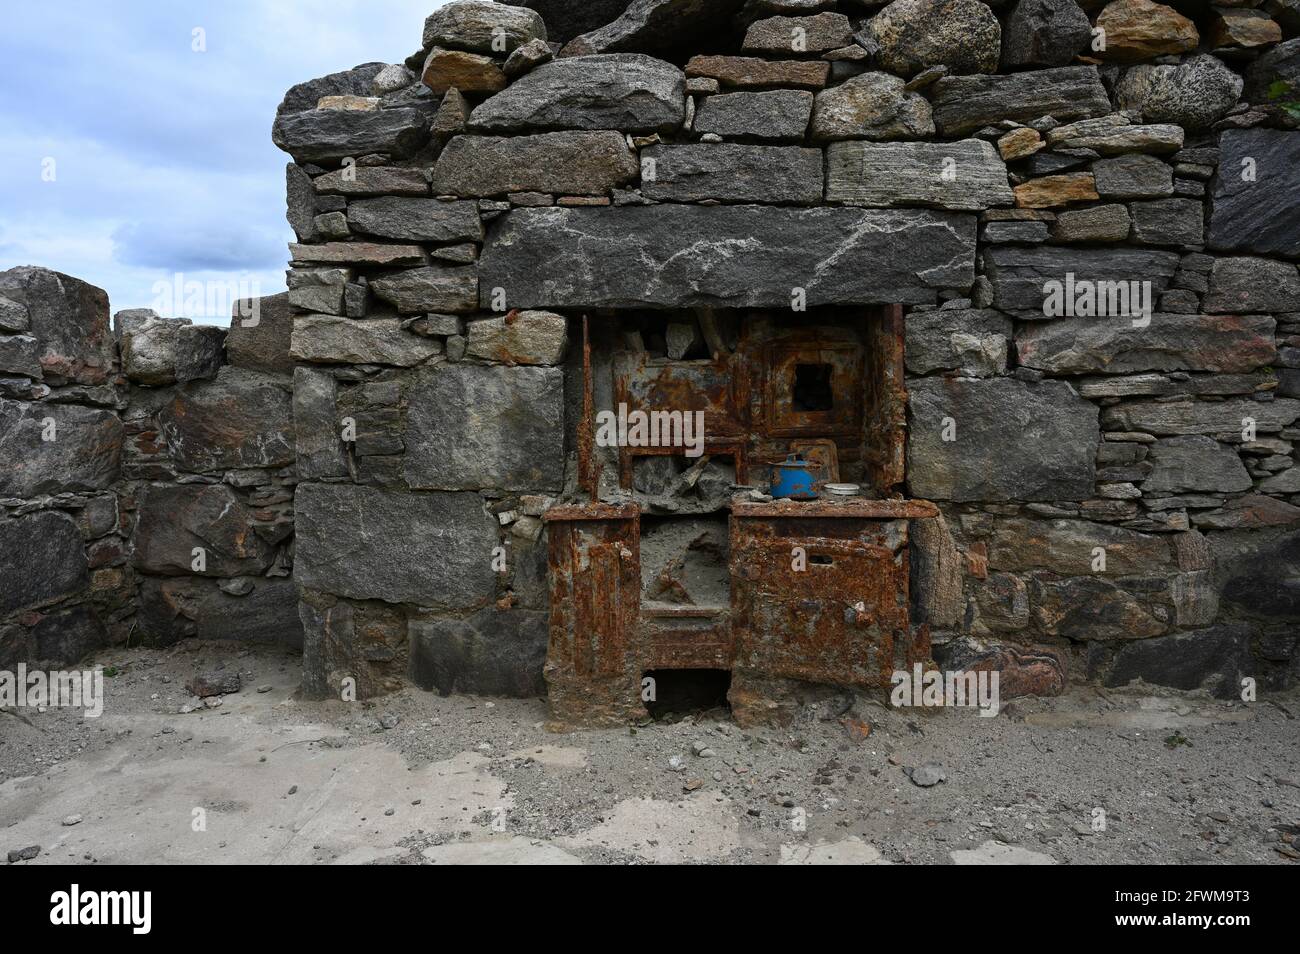 Old rusted cooking range and blue pot in ruins of stone cottage. Wall and roof are missing, showing blue sky. Exposed to elements. Isle of Lewis. Stock Photo